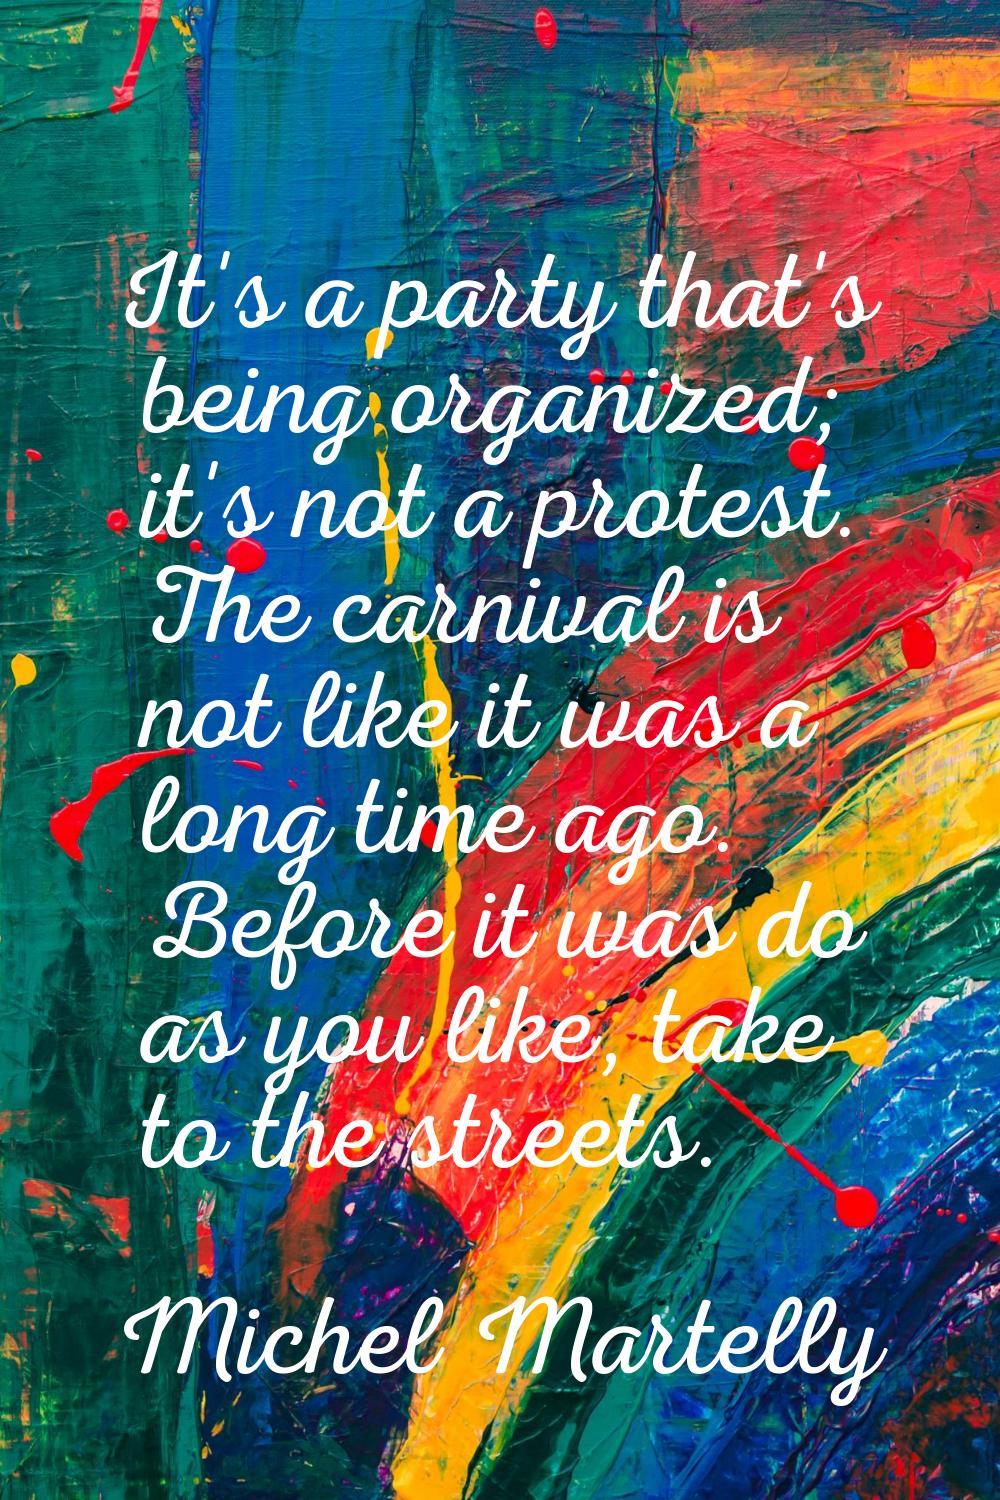 It's a party that's being organized; it's not a protest. The carnival is not like it was a long tim